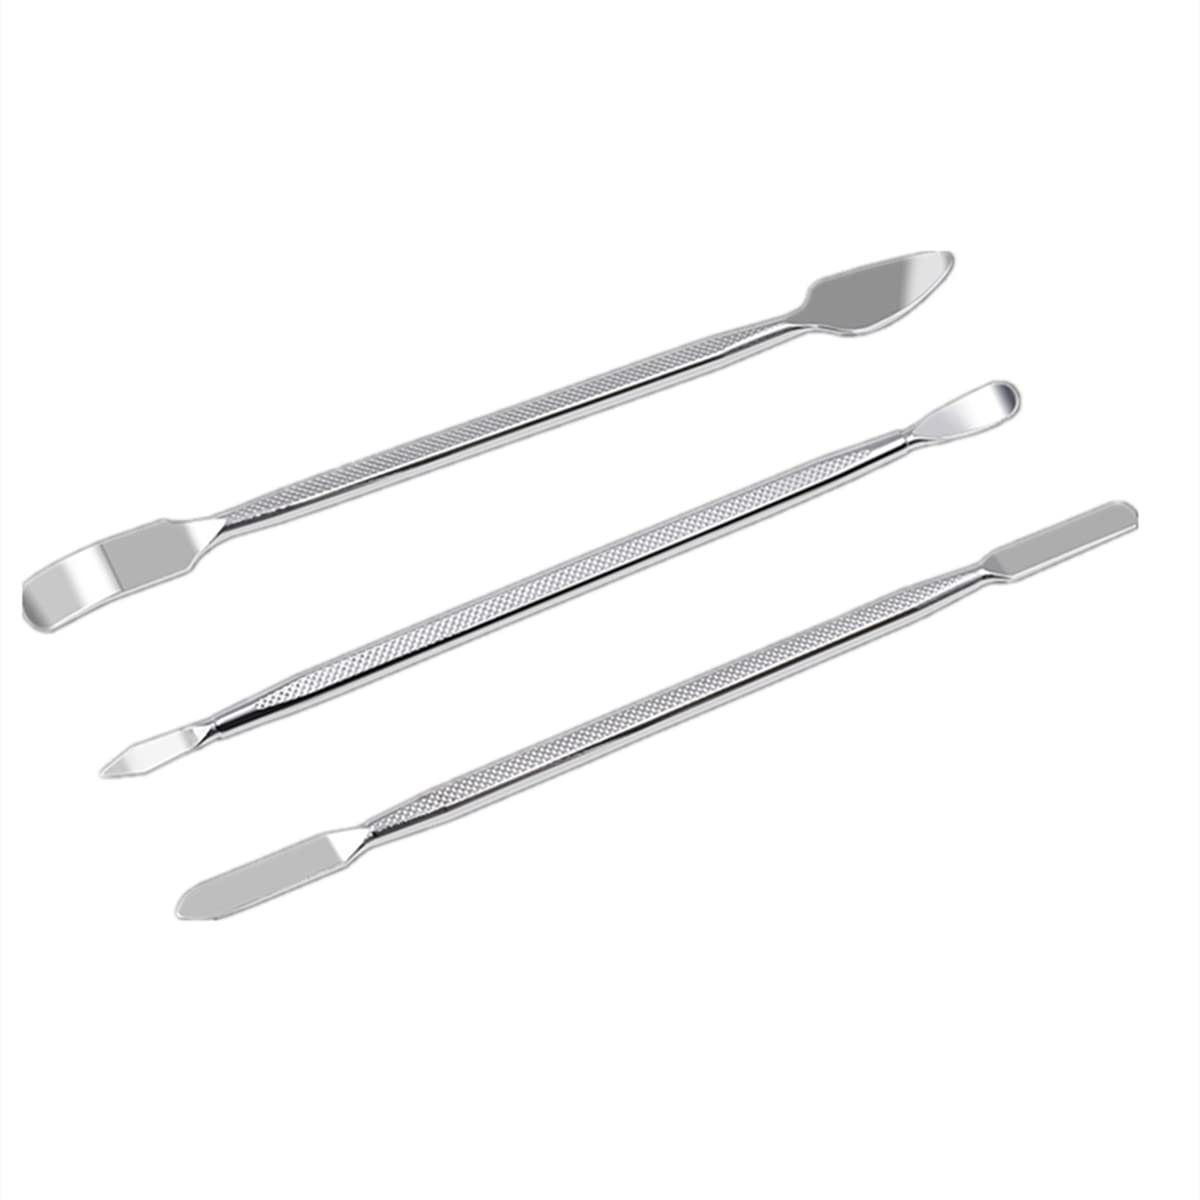 3pcs Metal Spudger Set Mobile Phone Opening Repair Pry Tool Double-ended Stainless Steel Thin Pry Bar Disassemble Hand Tool Kit for Electronics, Cell Phone, Laptop,tablets,ipad and Other Device